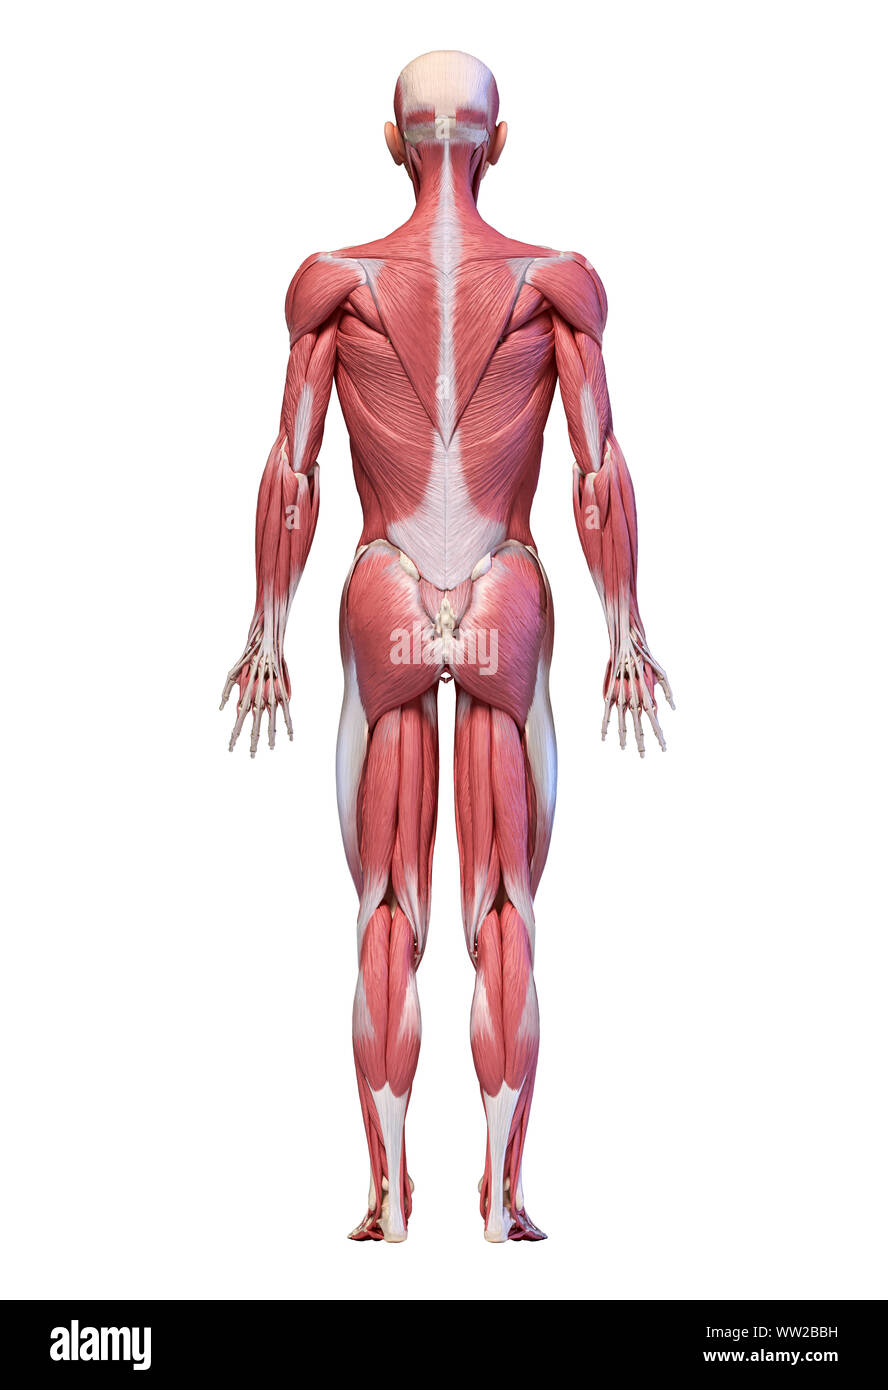 Human anatomy 3d illustration, male muscular system full body, back view on  white background Stock Photo - Alamy